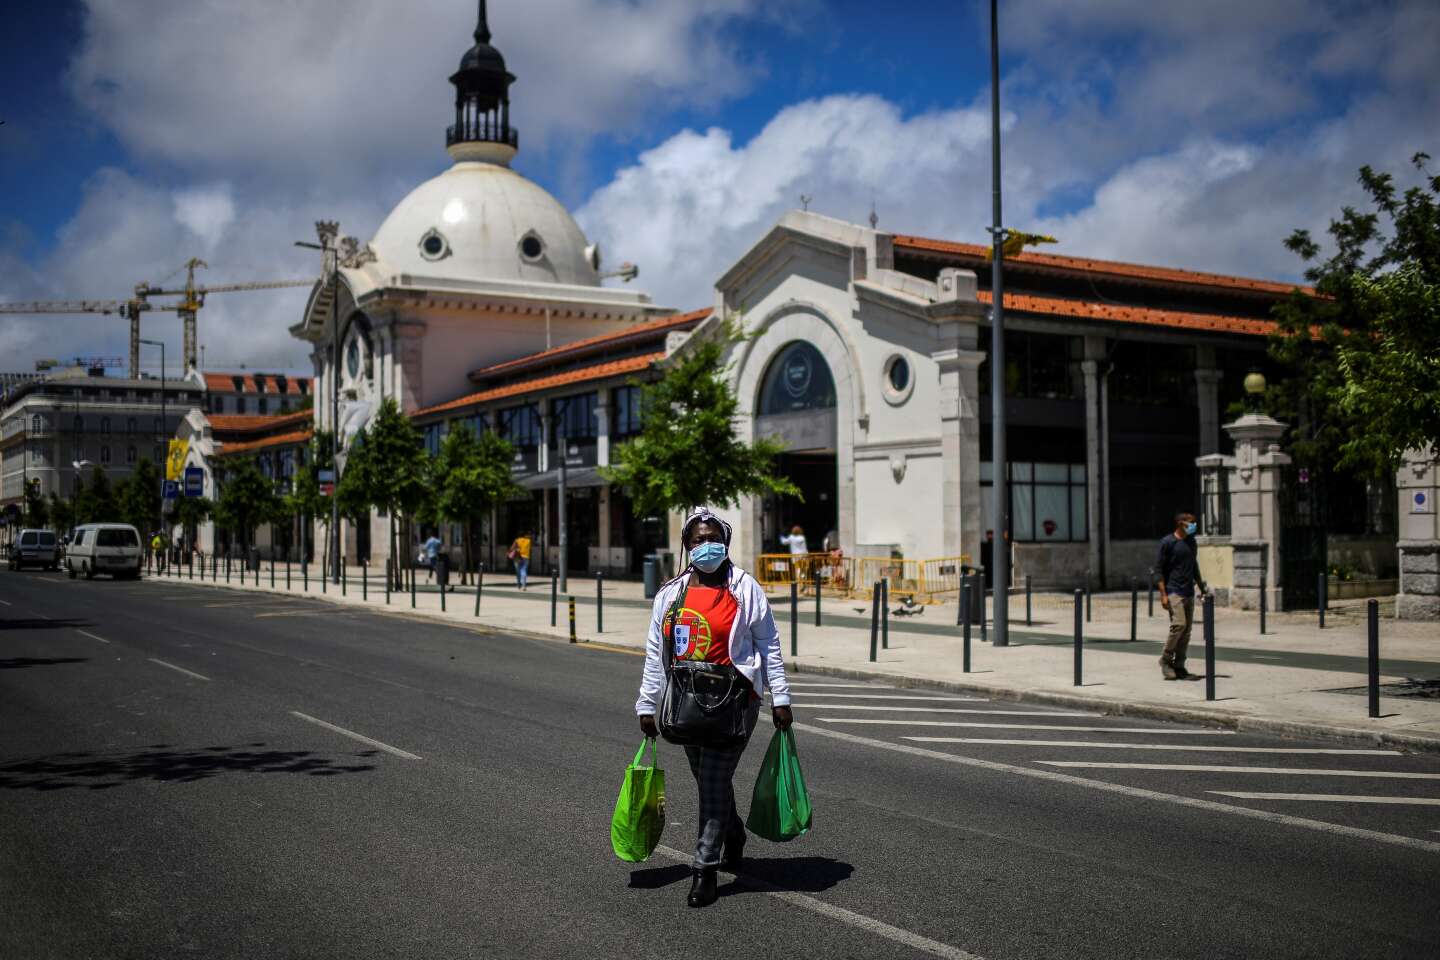 In Portugal, supermarket margins in the sights of the government